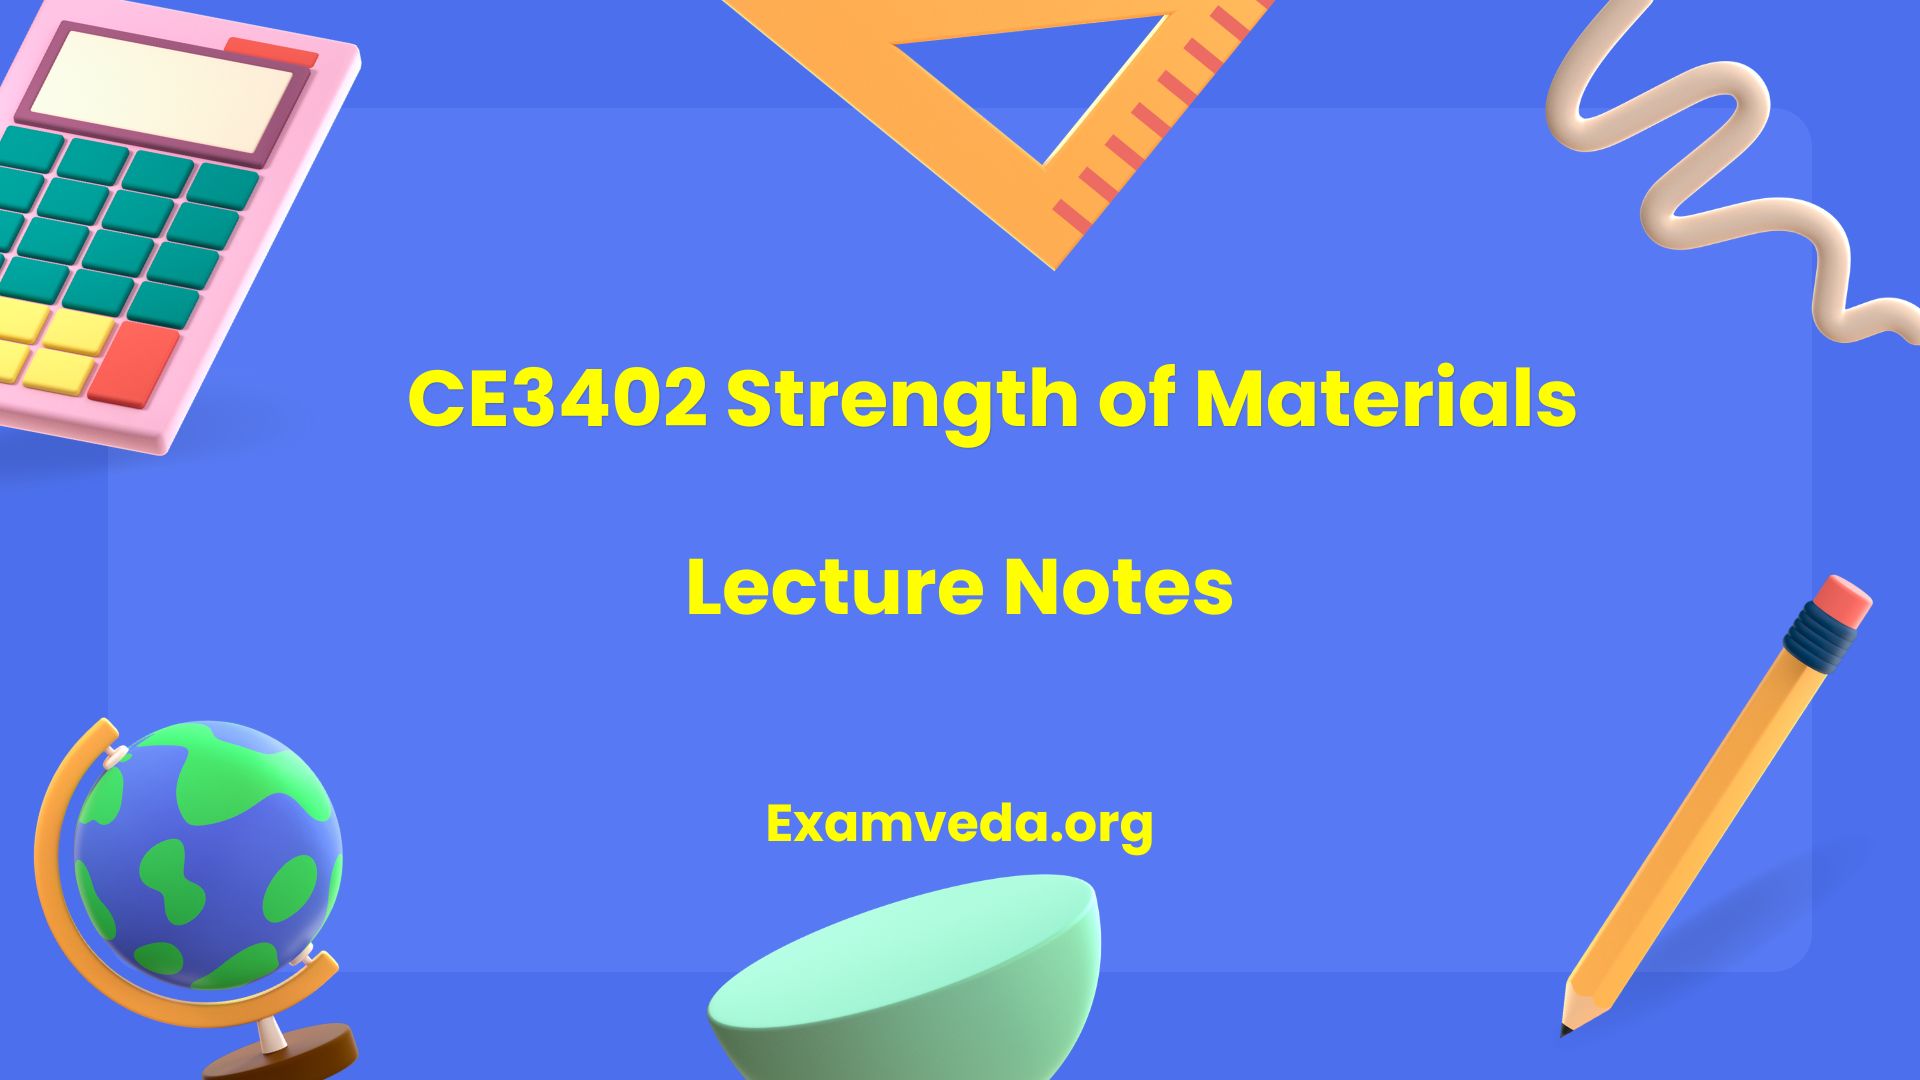 CE3402 Strength of Materials Lecture Notes